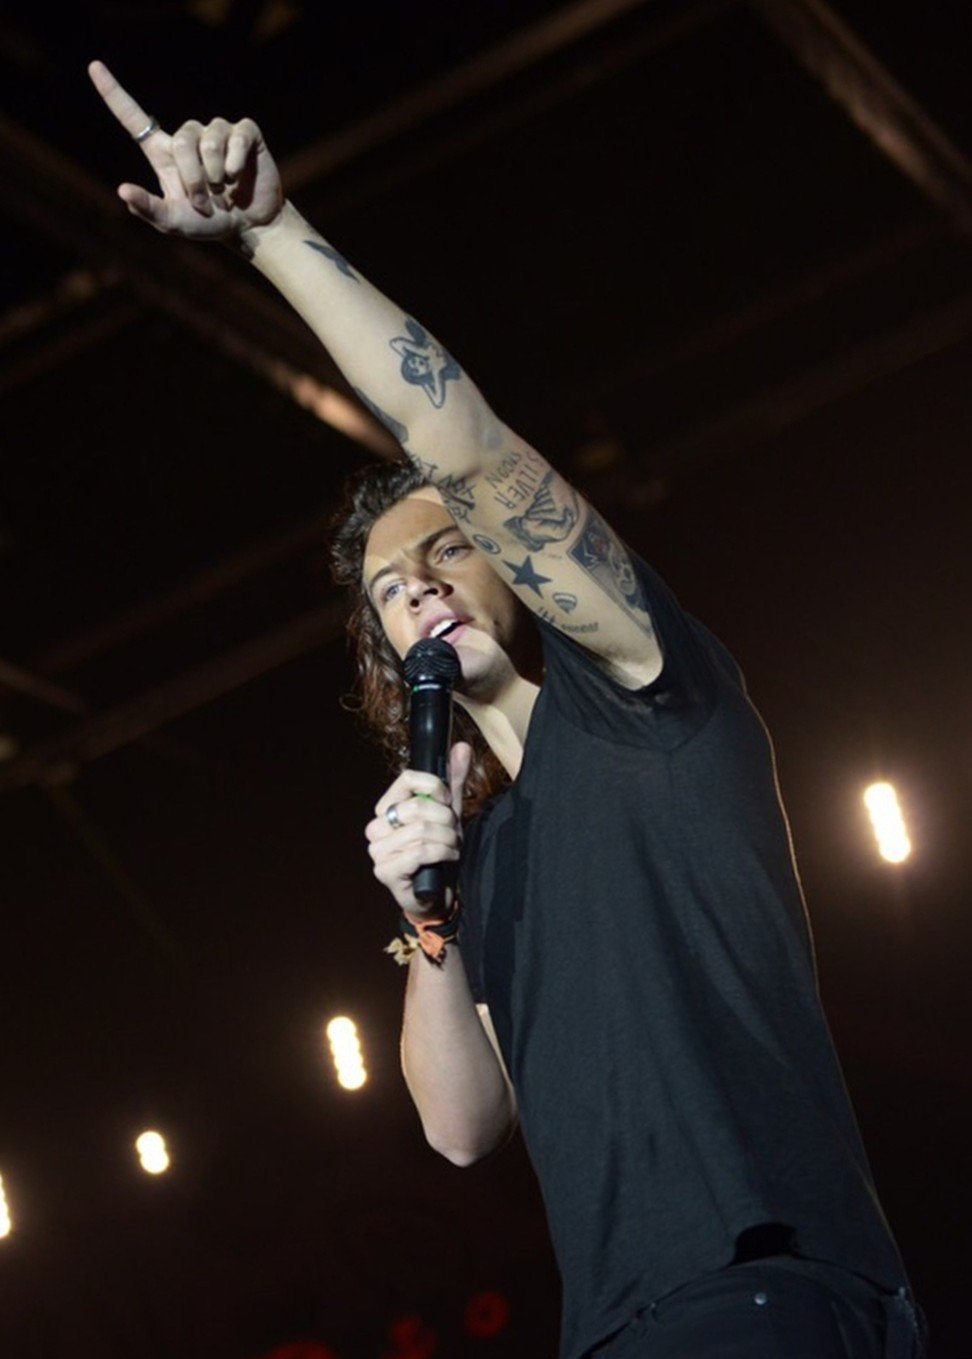 Harry Styles of English-Irish pop boy band One Direction, performing in Hong Kong in March 2015. Photo: Live Nation Lushington